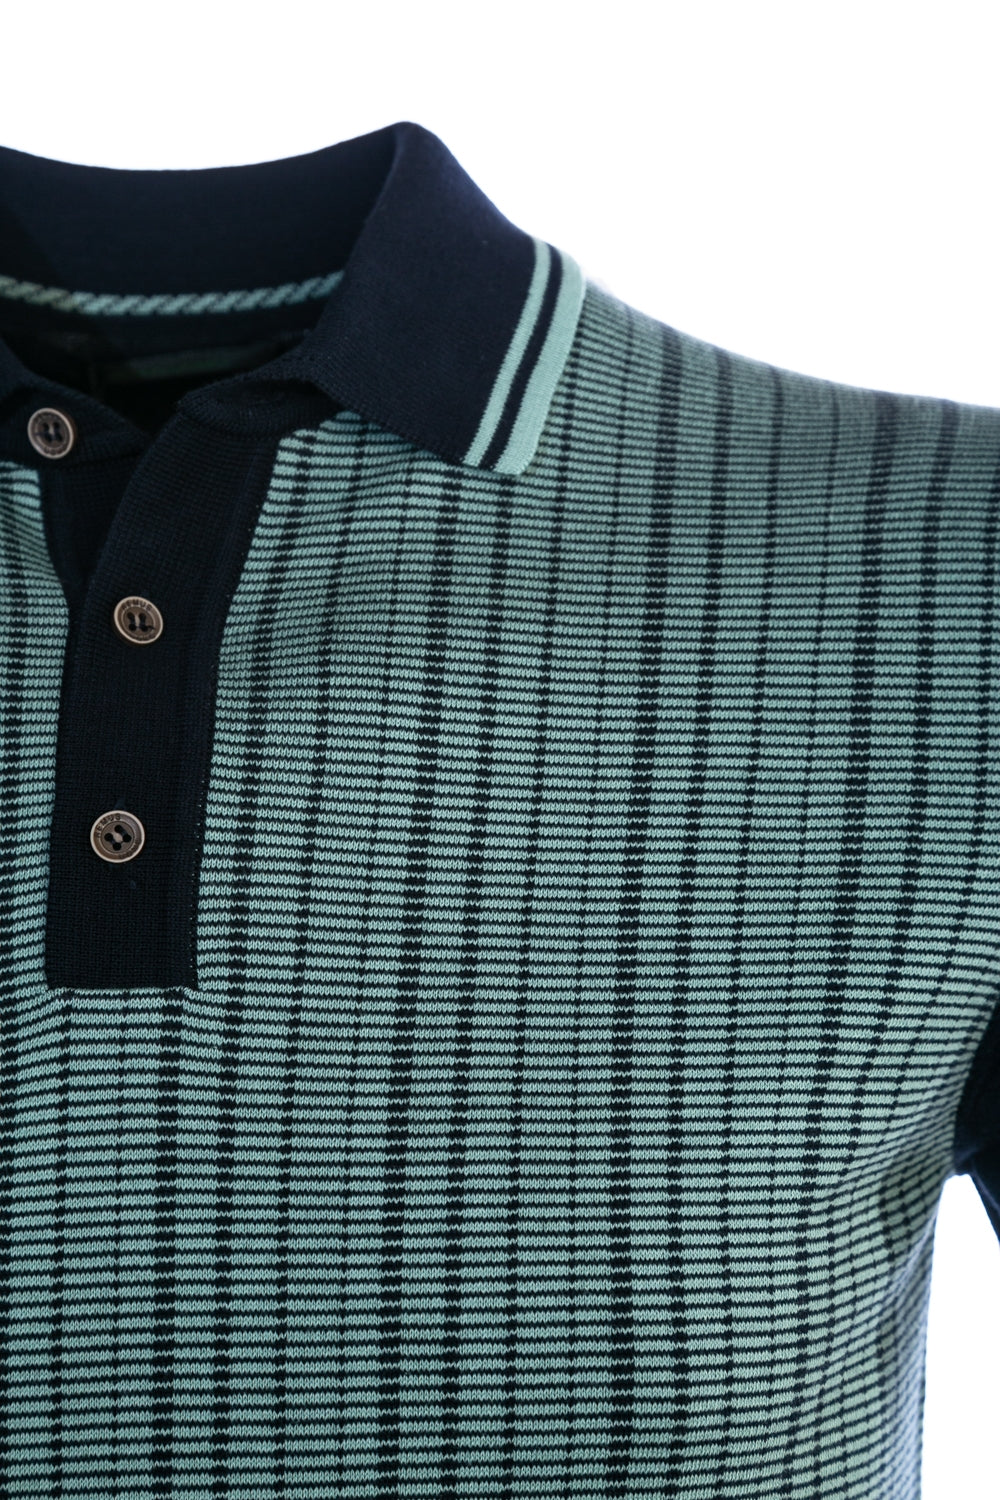 Remus Uomo Abstract Stripe Front Knitted Polo Shirt in Navy & Mint